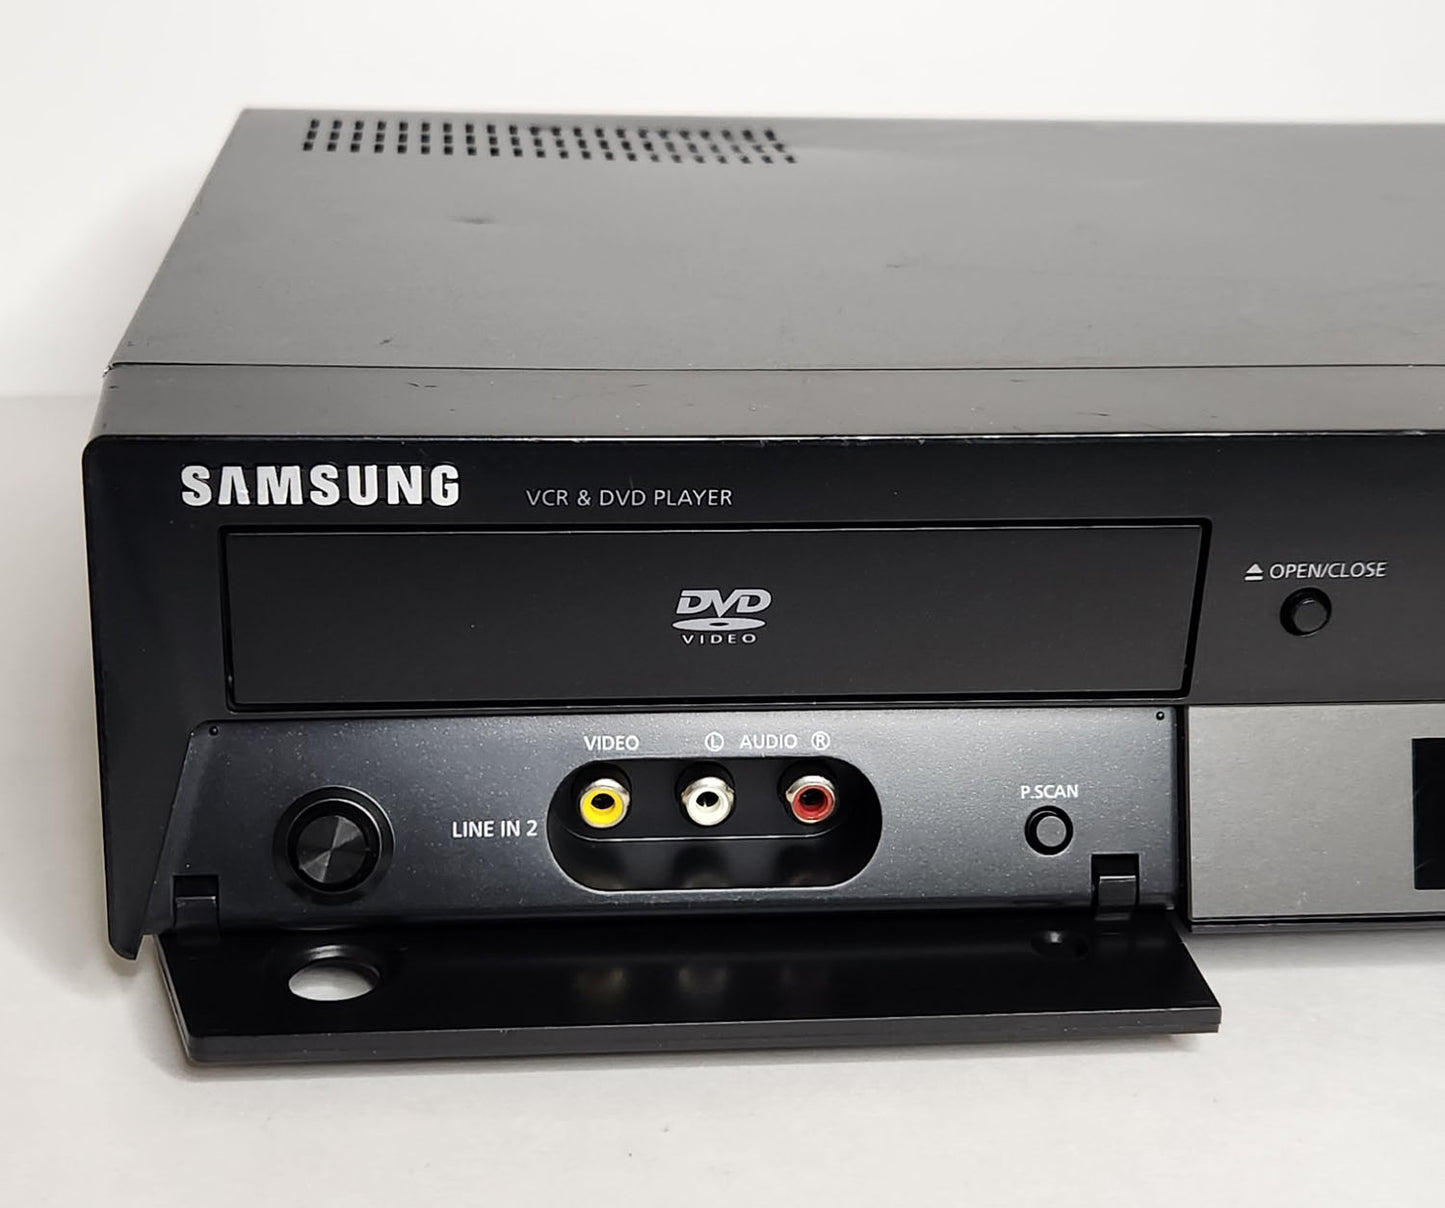 Samsung DVD-V9700 VCR/DVD Player Combo with HDMI - Left Detail